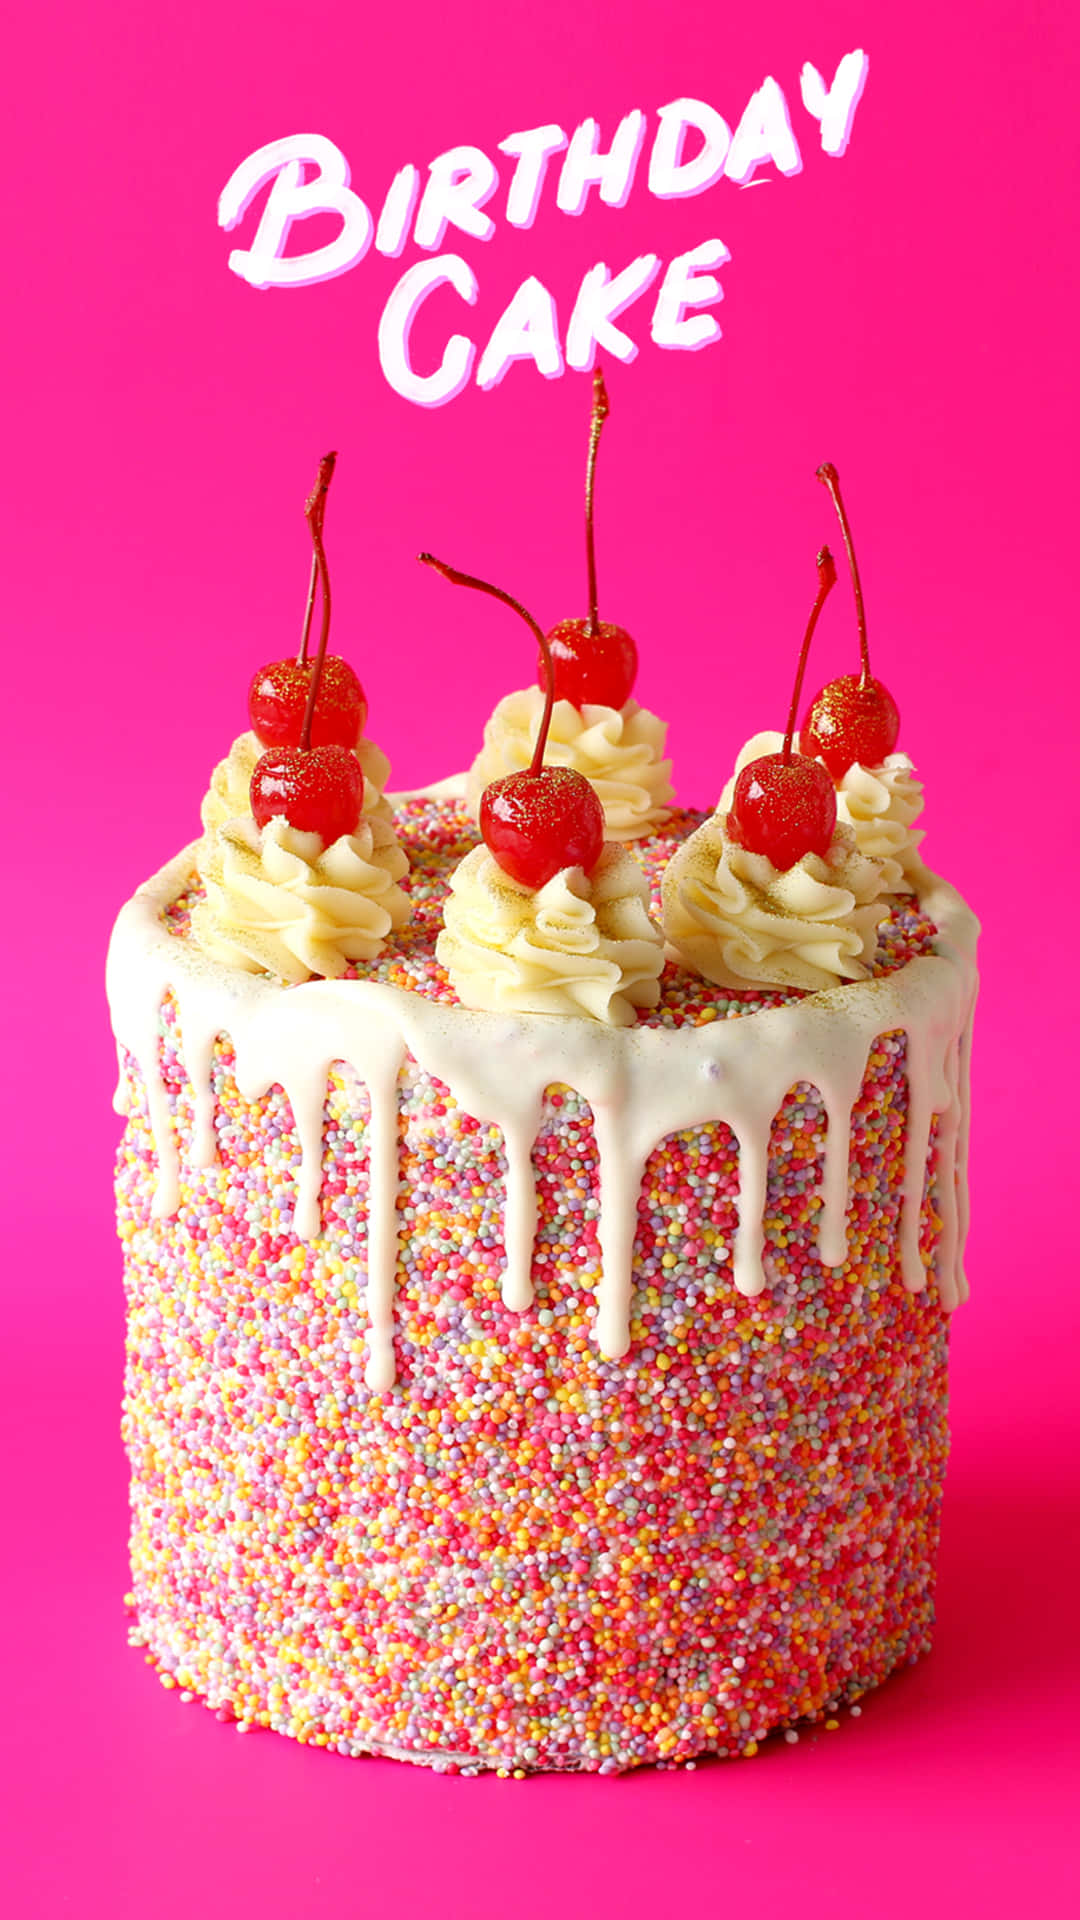 A Birthday Cake With Sprinkles And Cherries On A Pink Background